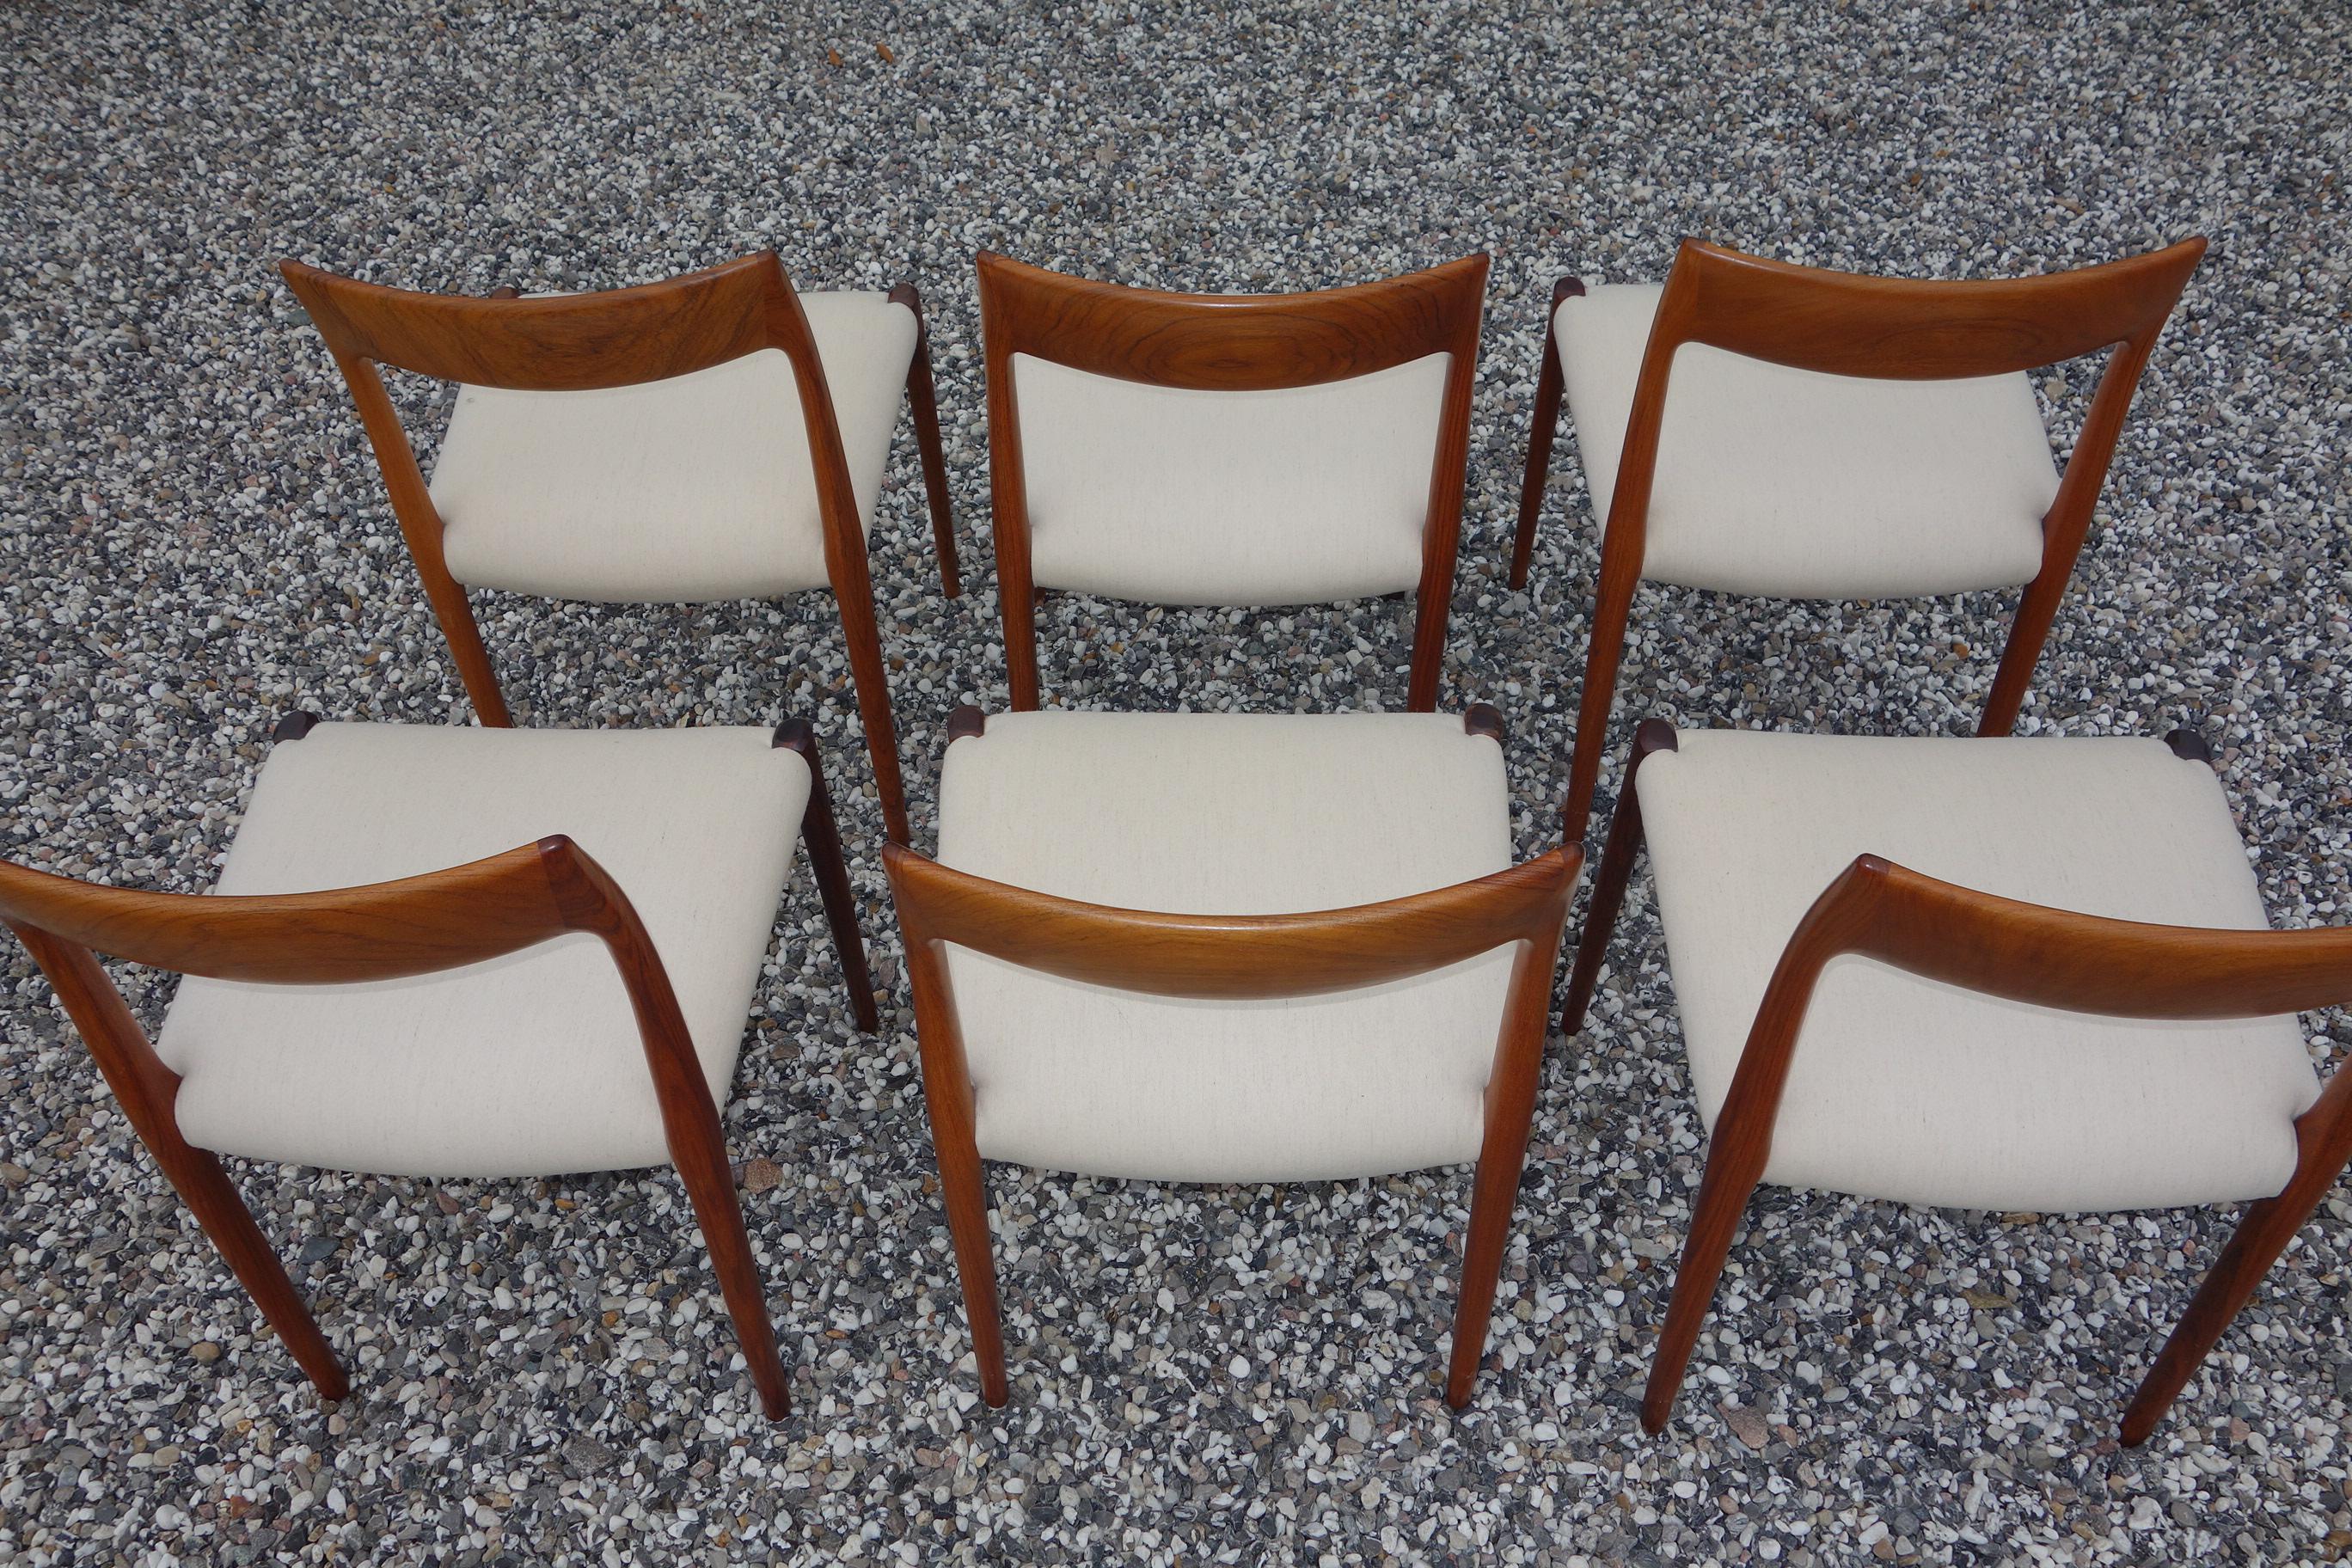 Niels O. Møller 1920-1982. 6 rosewood chairs, white wool clothing. Designed in 1959. Produced by J.L. Møllers Møbelfabrik, model 77. Very fine condition.